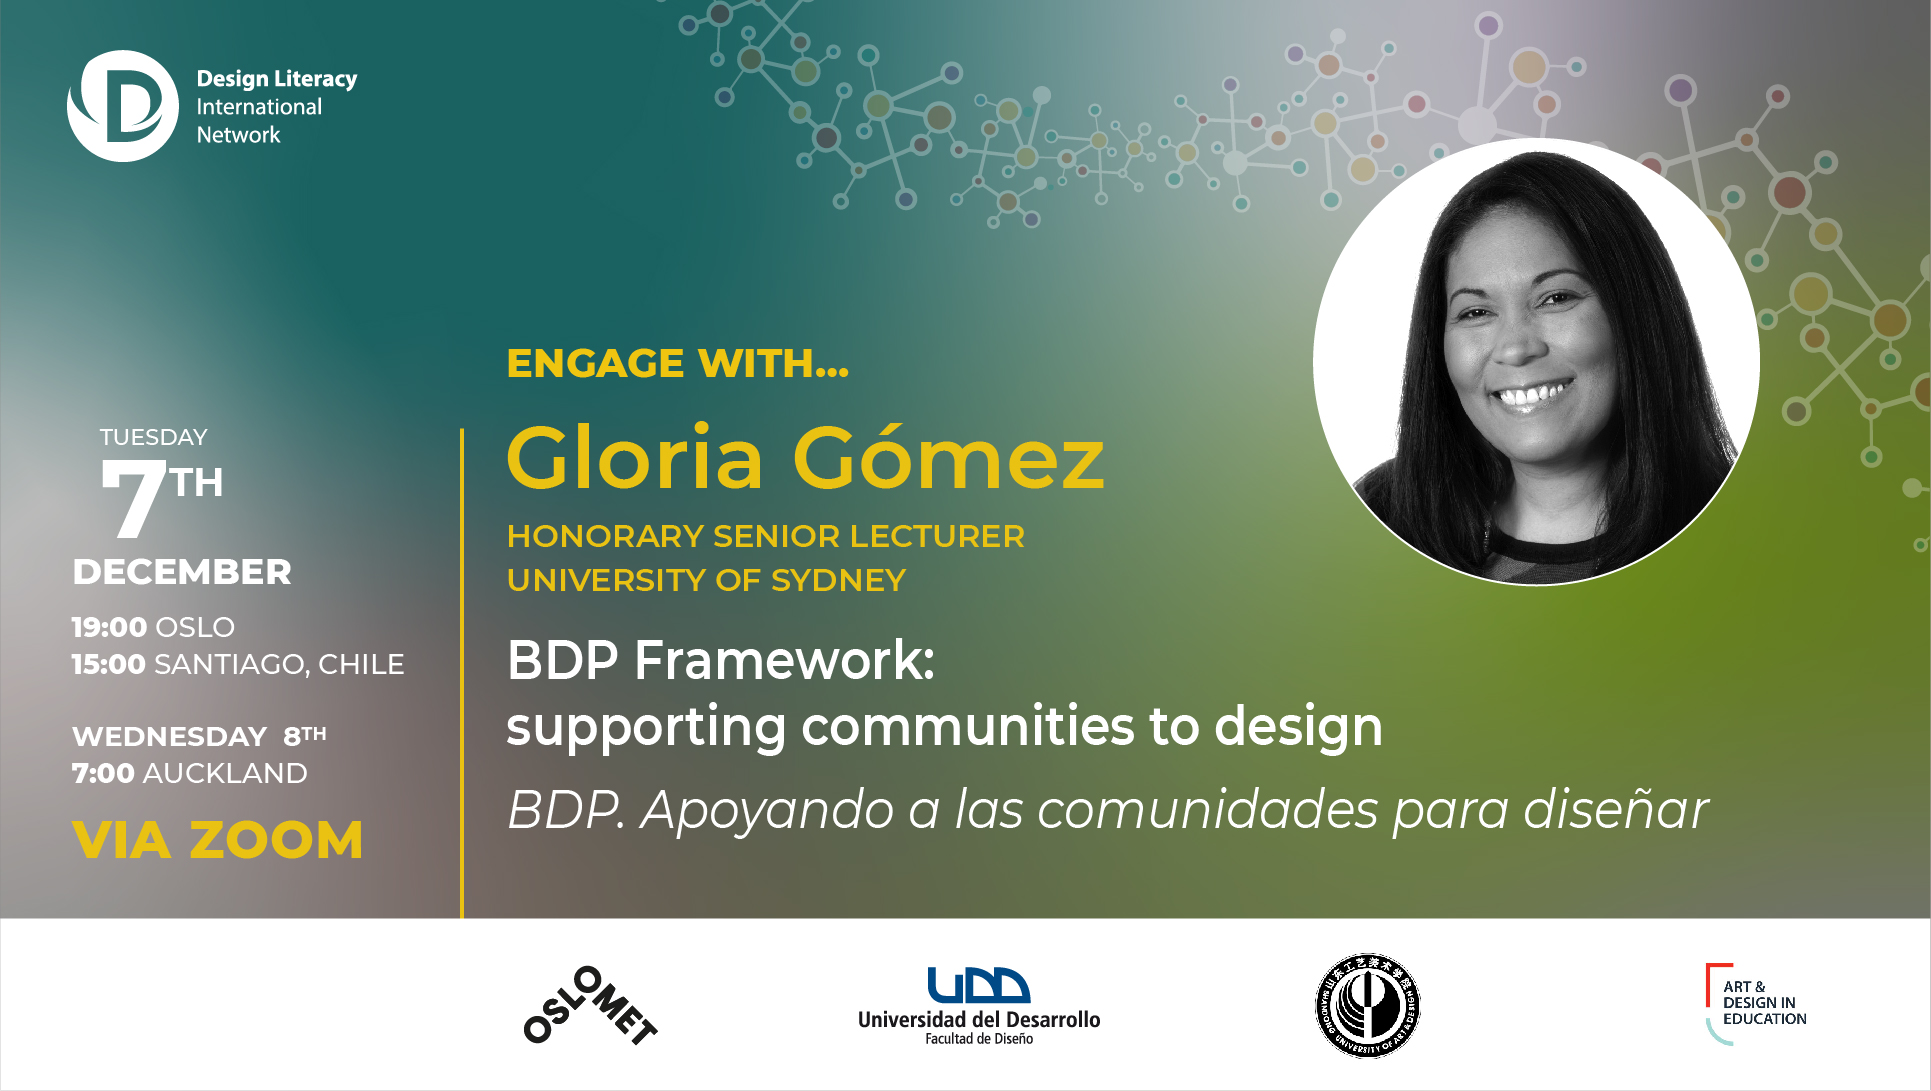 Engage with Gloria Gomez | Event Archive | 15th Design Literacy International Network event